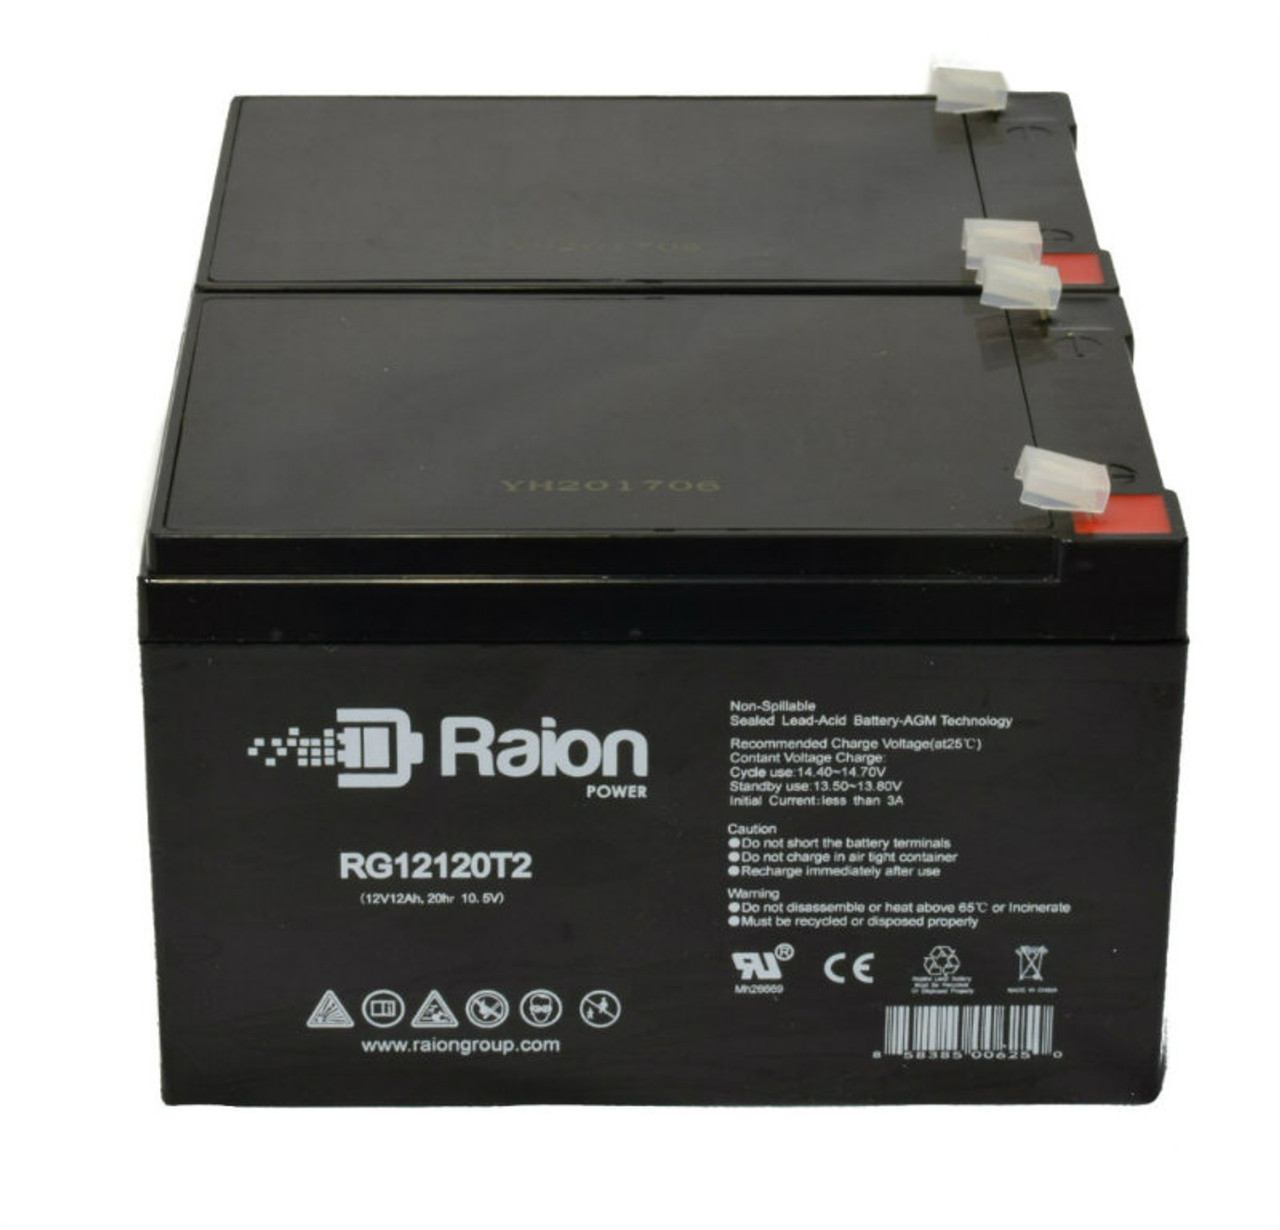 Raion Power RG12120T2 12V 12Ah Replacement UPS Battery for Minuteman MSU 1000i - 2 Pack